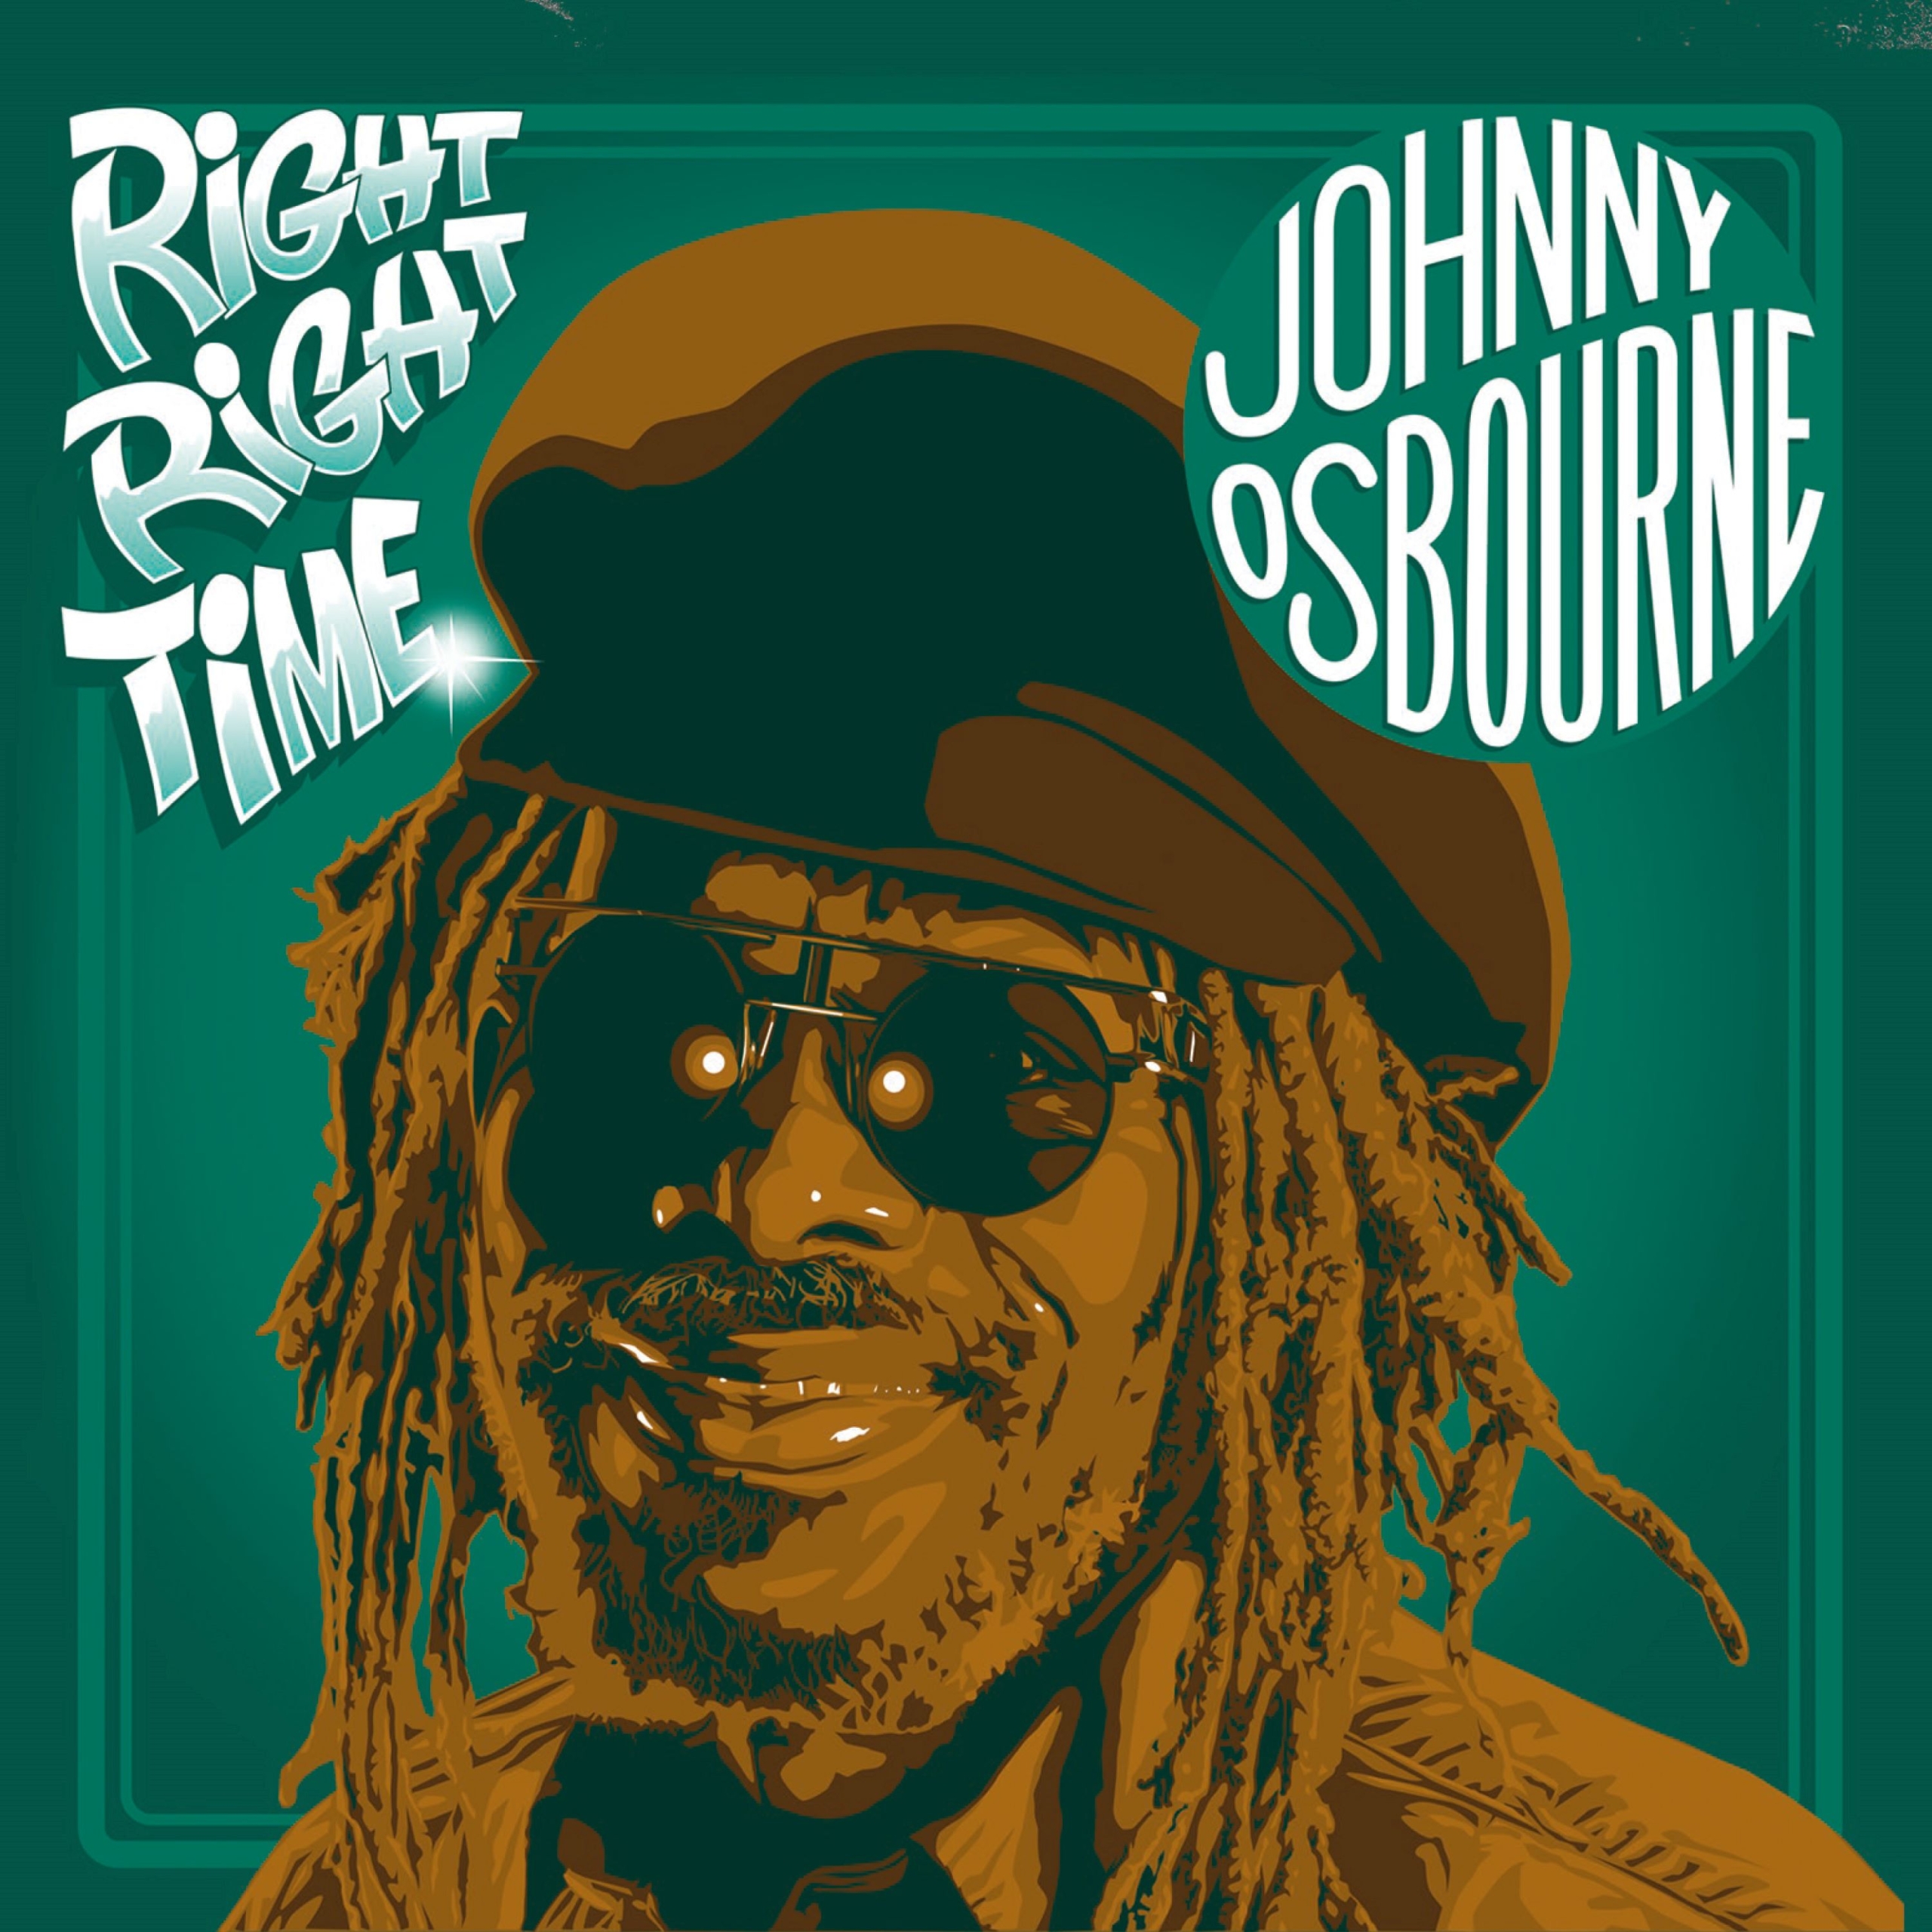 JOHNNY OSBOURNE RELEASES NEW ALBUM "RIGHT RIGHT TIME"